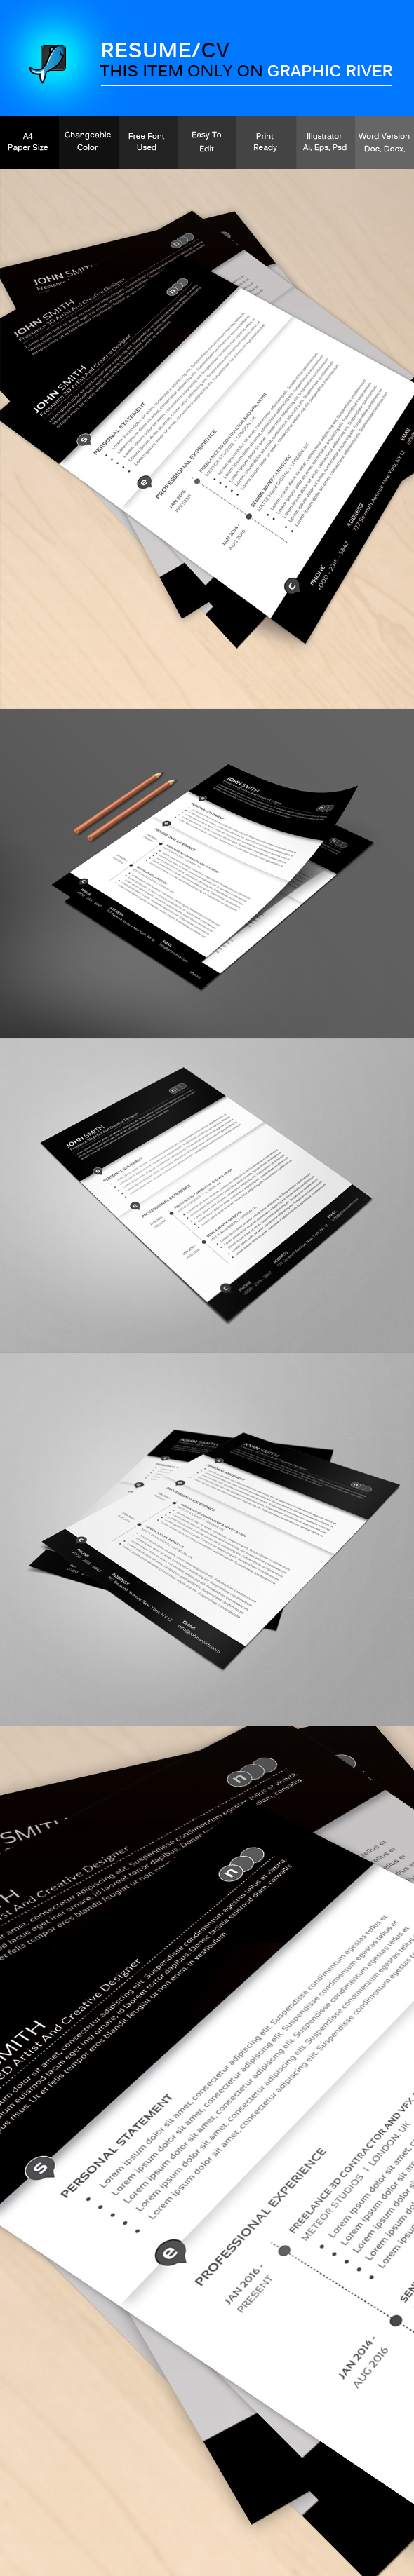 one page resume paper Personal Resume professional psd Resume template Resume/CV White black resume